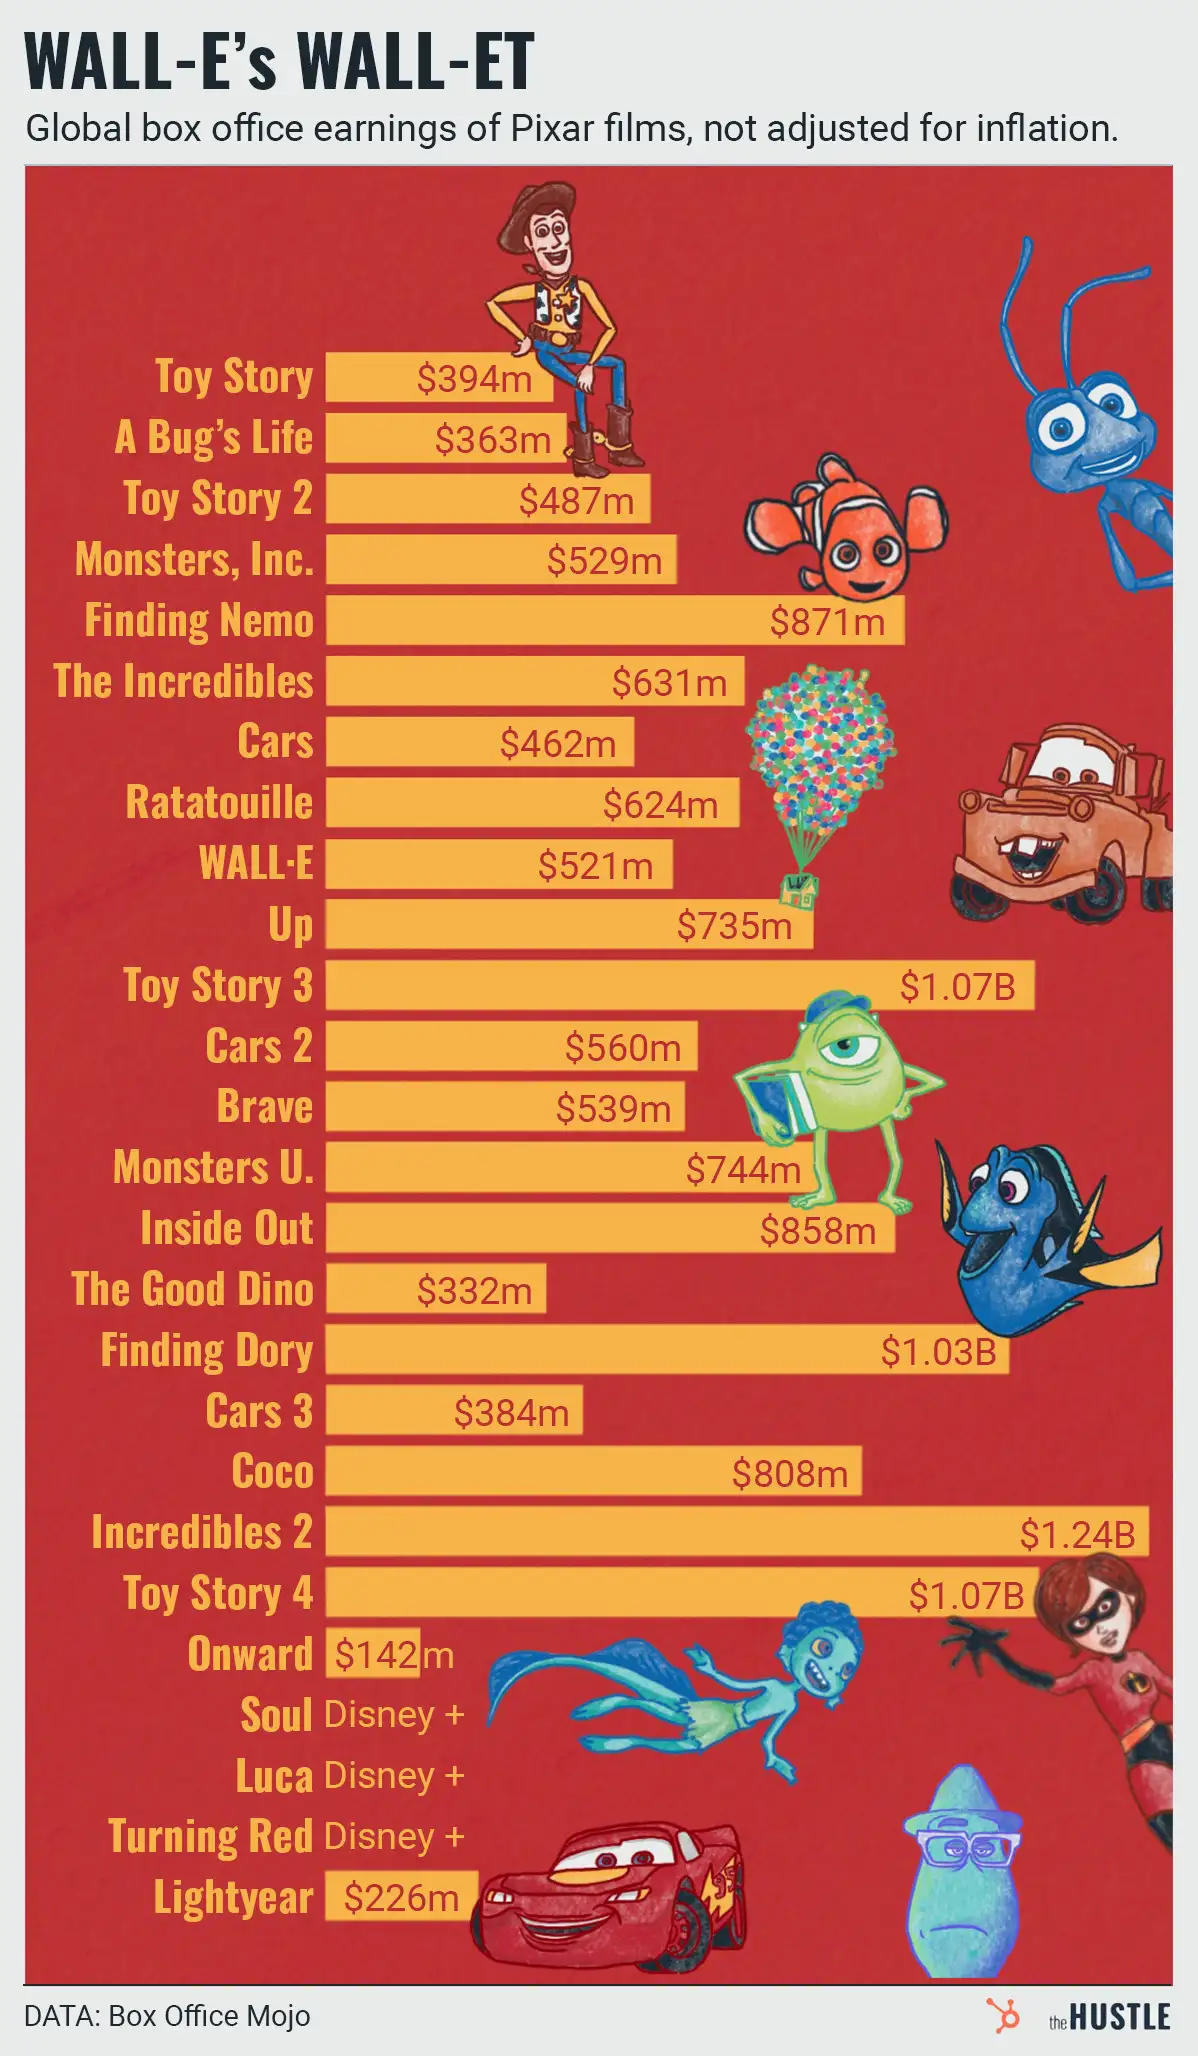 Pixar’s box office mojo is out of its element